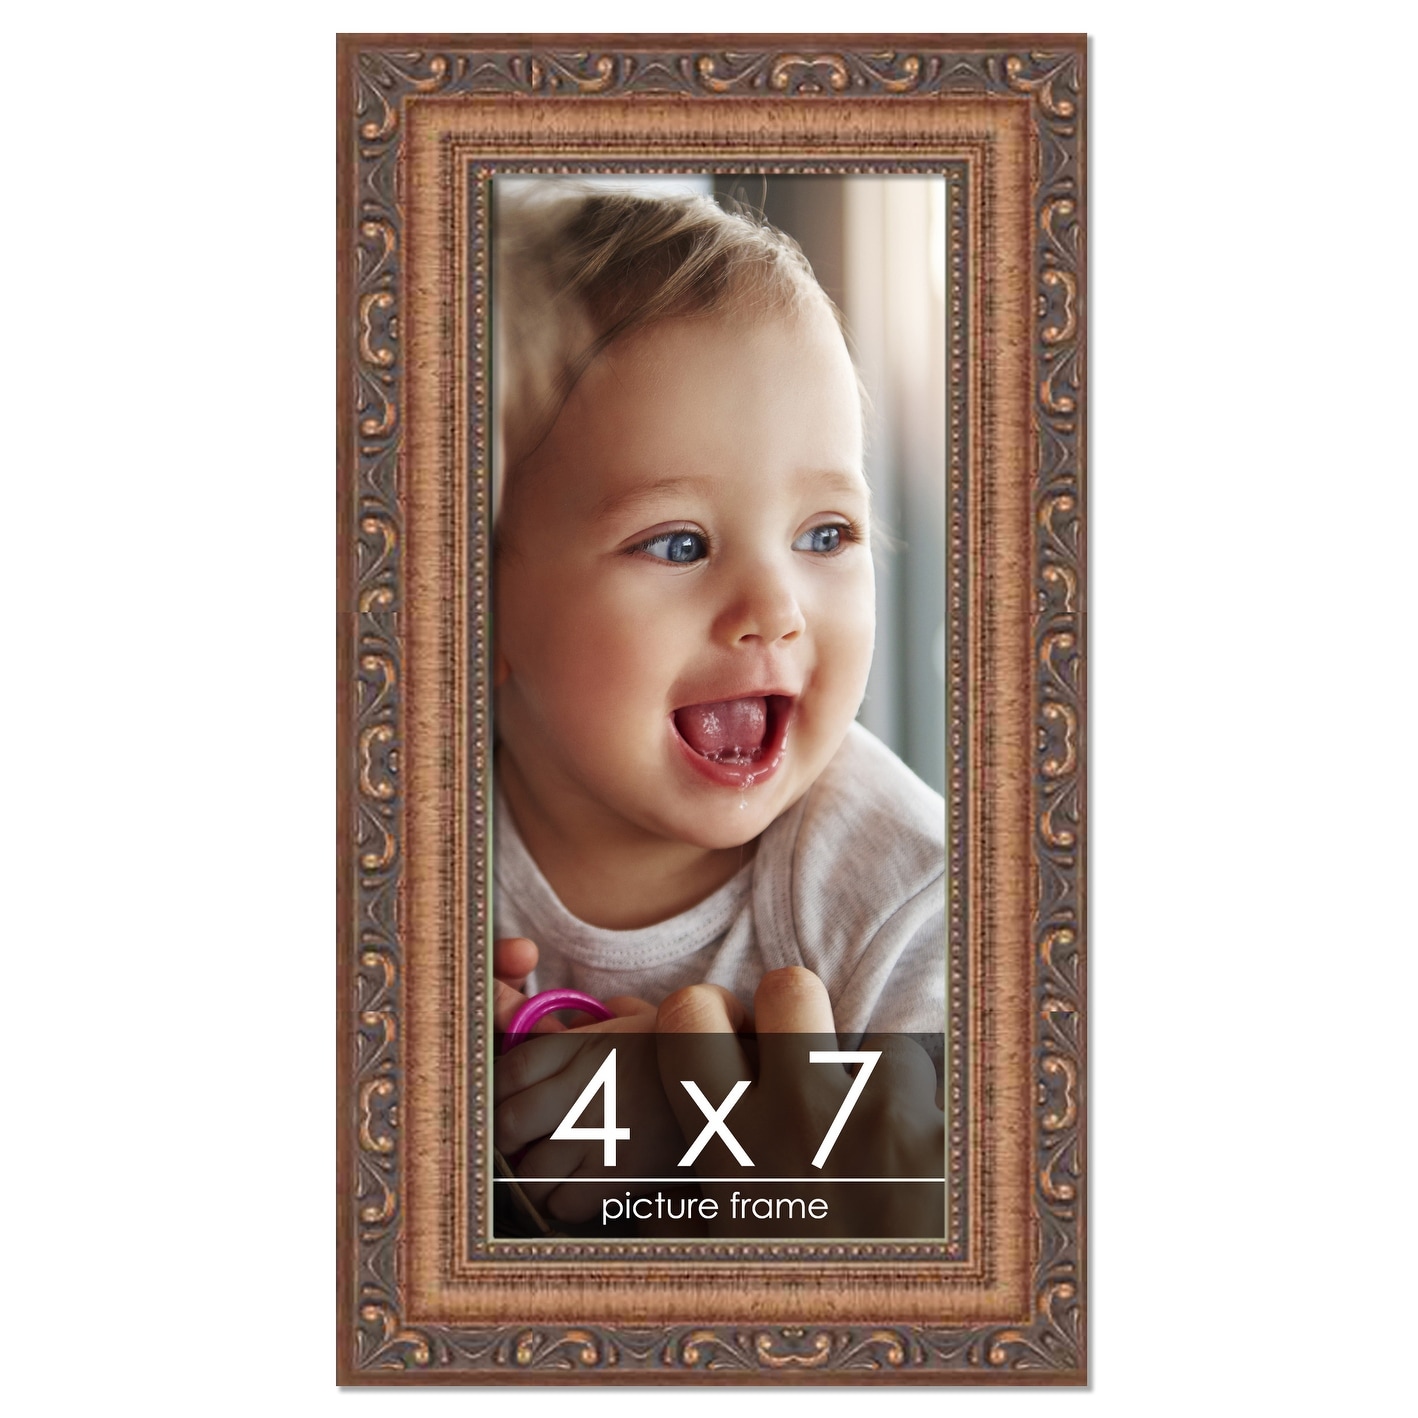 https://ak1.ostkcdn.com/images/products/is/images/direct/18105f7e2a9c6661a294b8882ad614460c842543/4x7-Frame-Gold-Antique-Picture-Frame-with-UV-Acrylic%2C-Foam-Board-Backing%2C-%26-Hardware.jpg